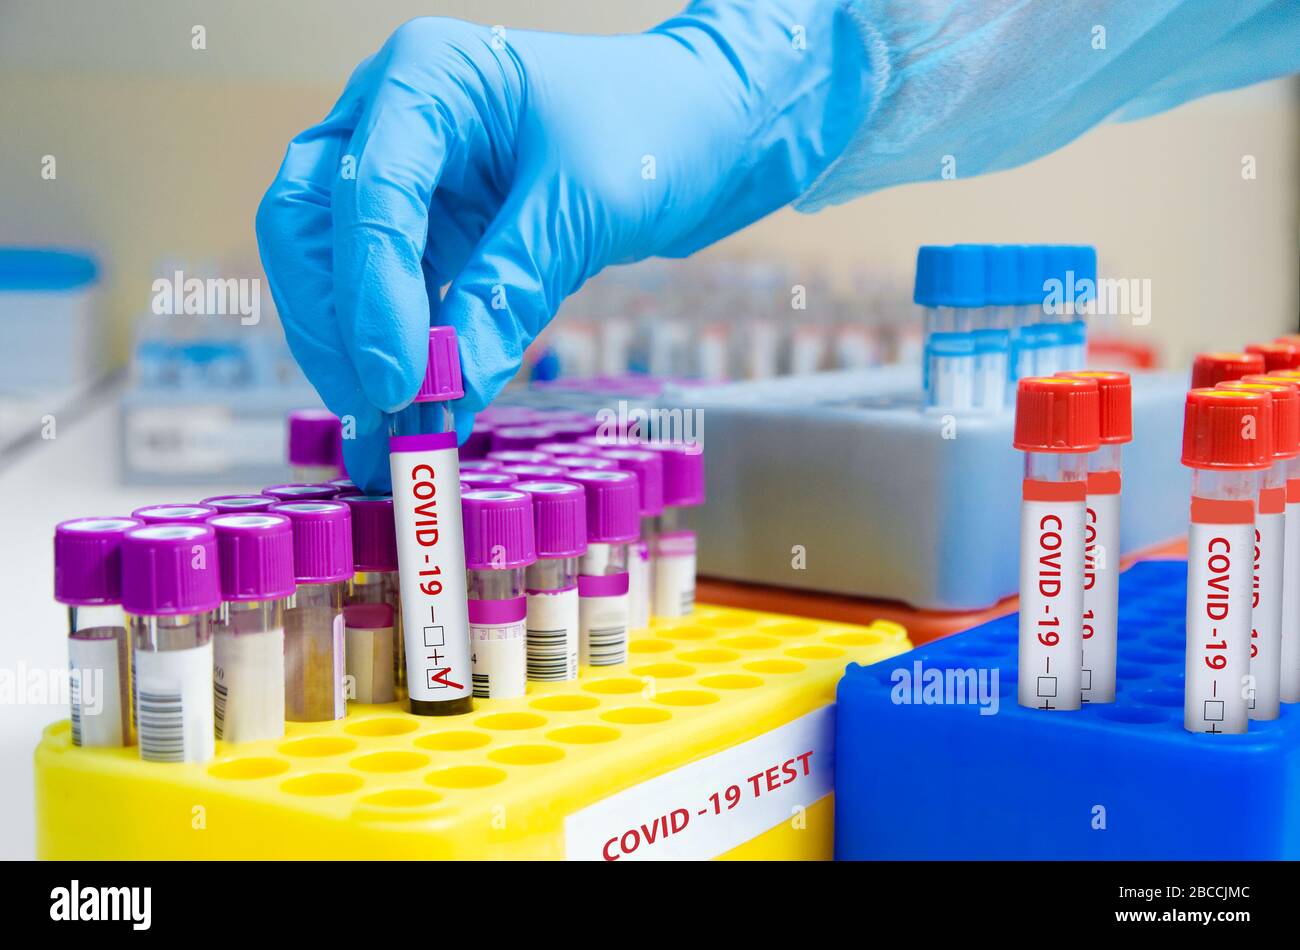 Positive test for Covid-19. An infected Covid-19 sample in a test tube with a label in the doctor's hand. Laboratory tube with SARS-CoV2. Laboratory C Stock Photo